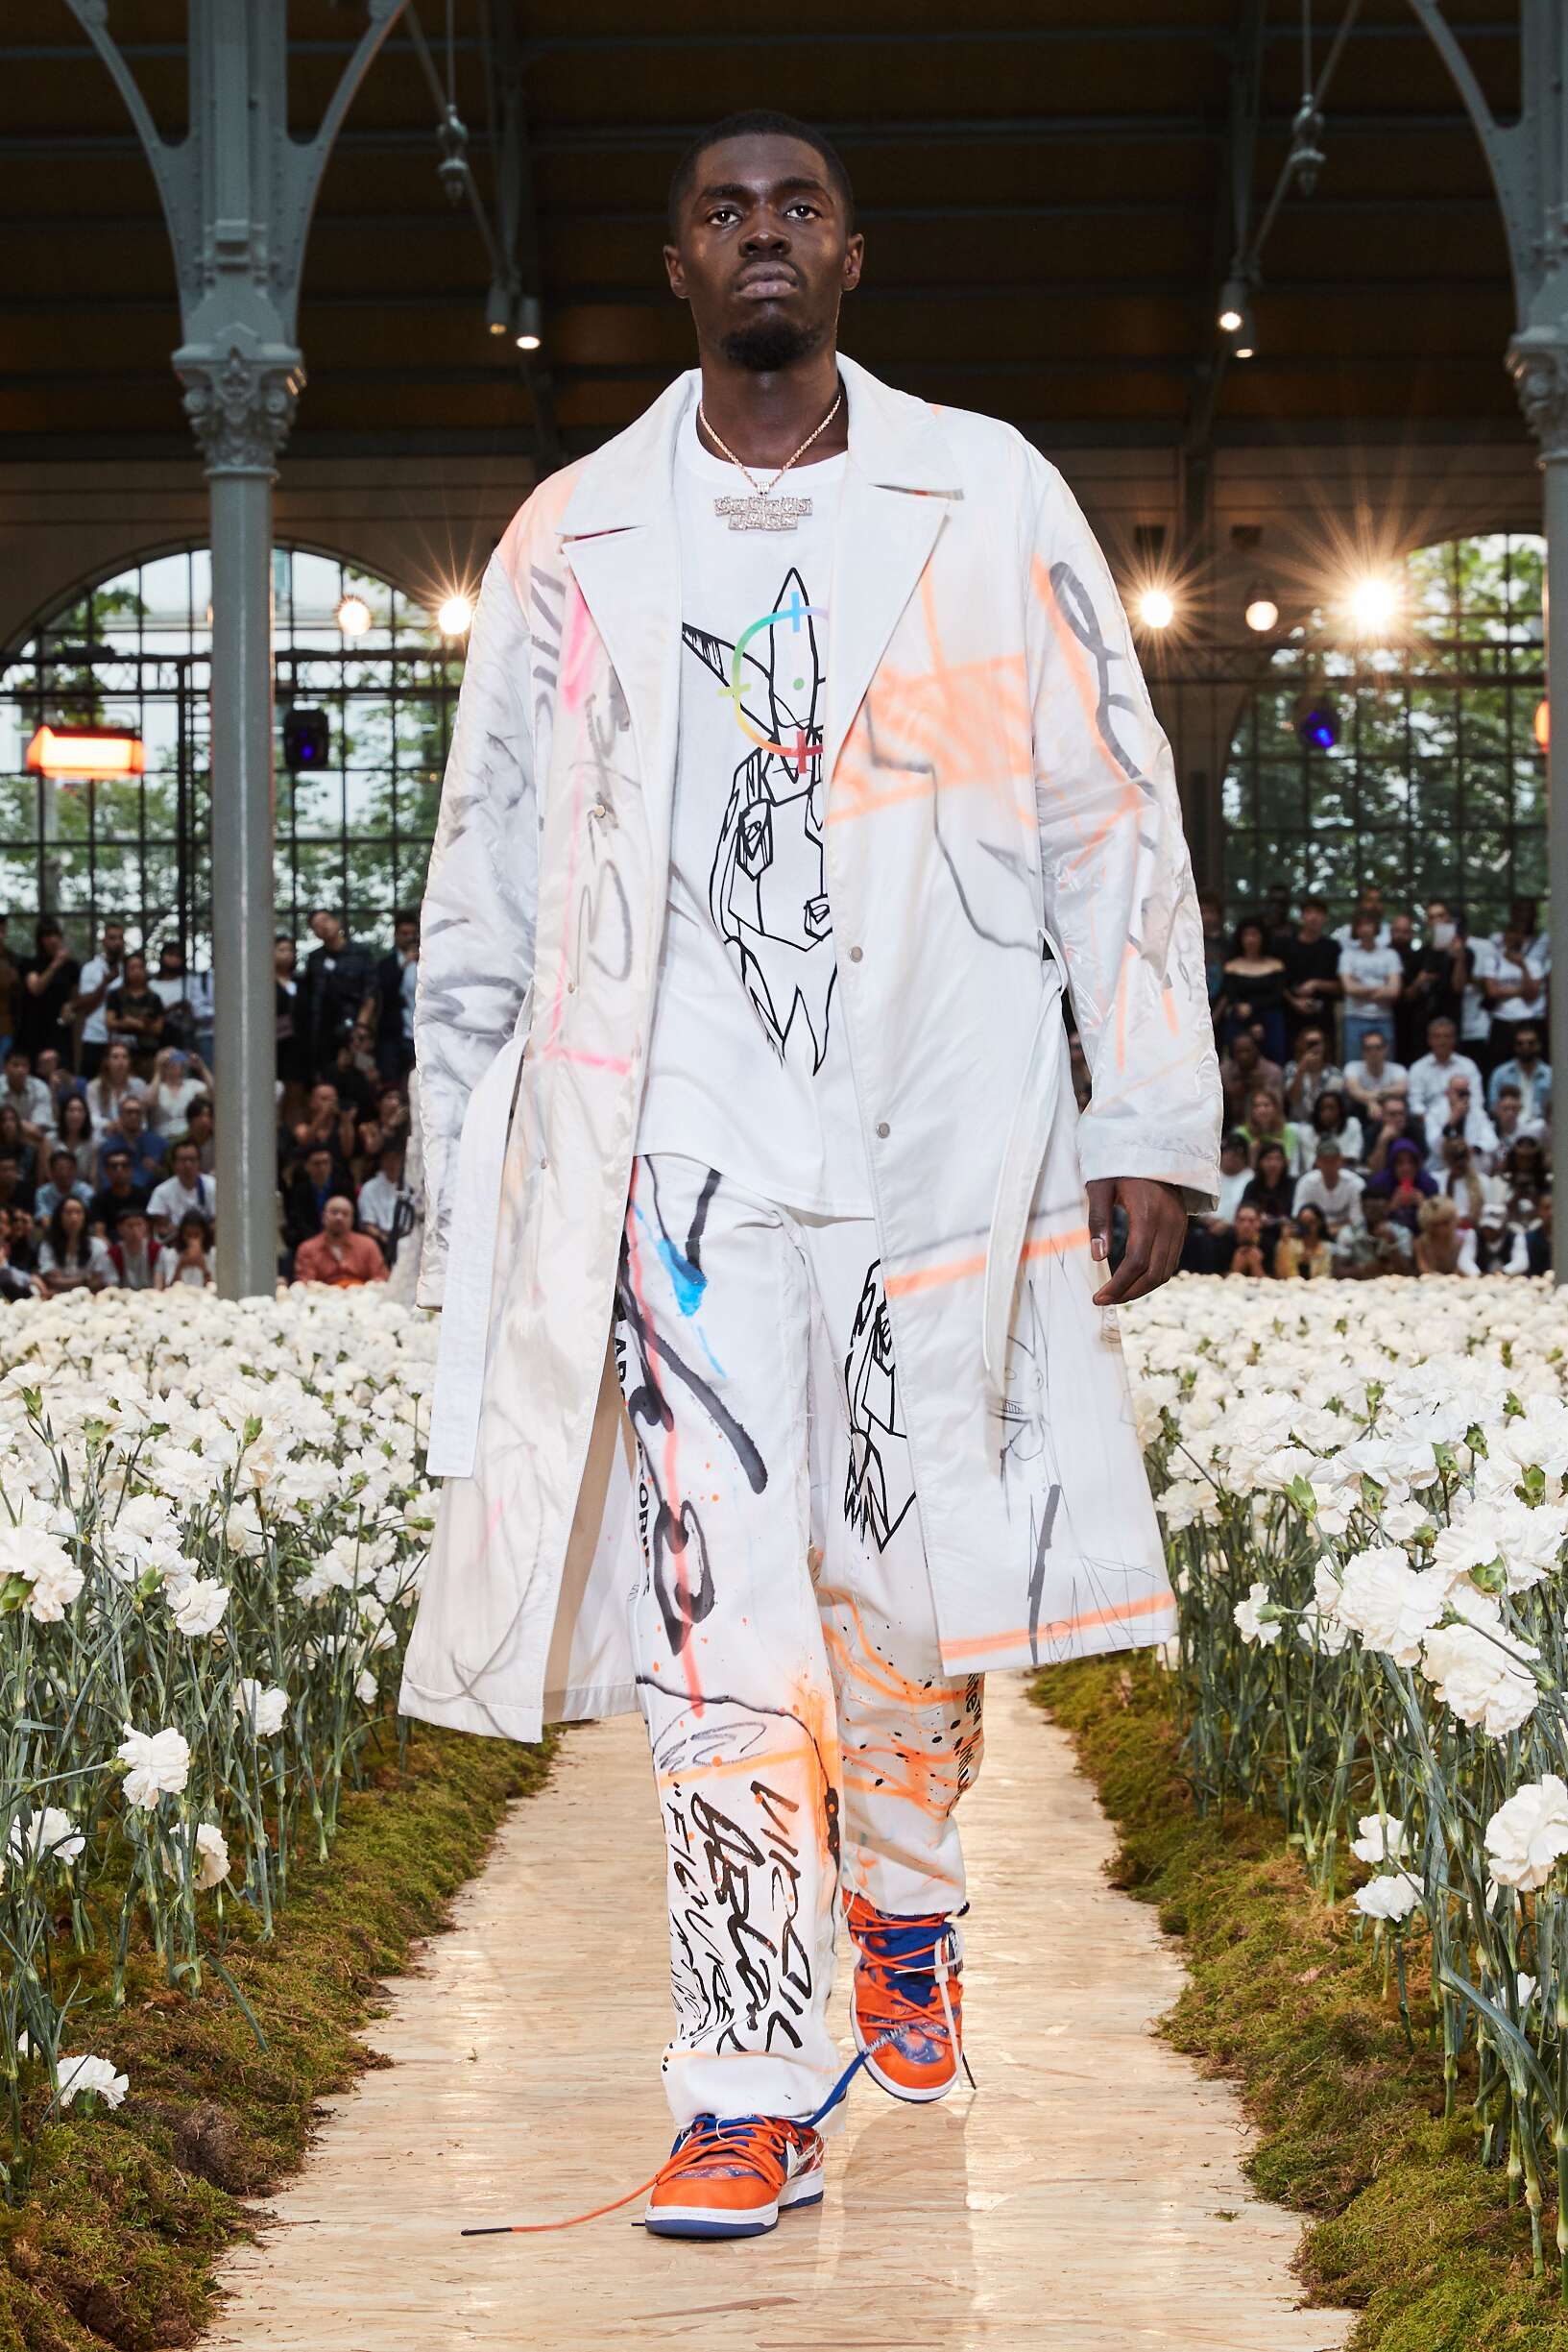 Virgil Abloh: The Man Who Brought The Street To The Catwalk